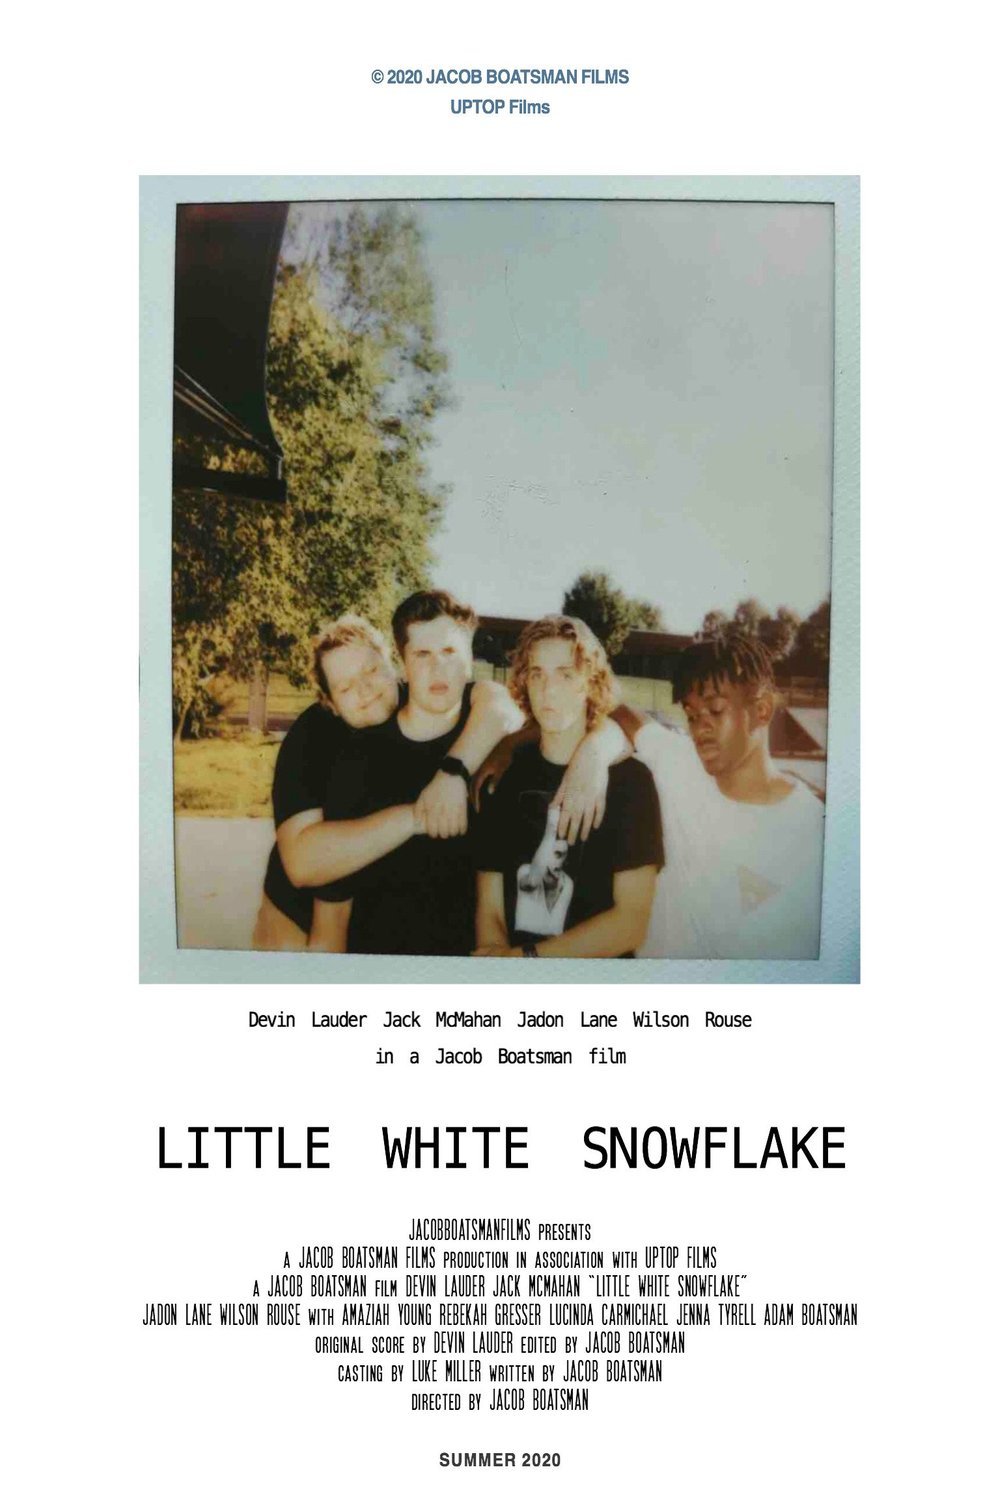 Poster of the movie Little White Snowflake